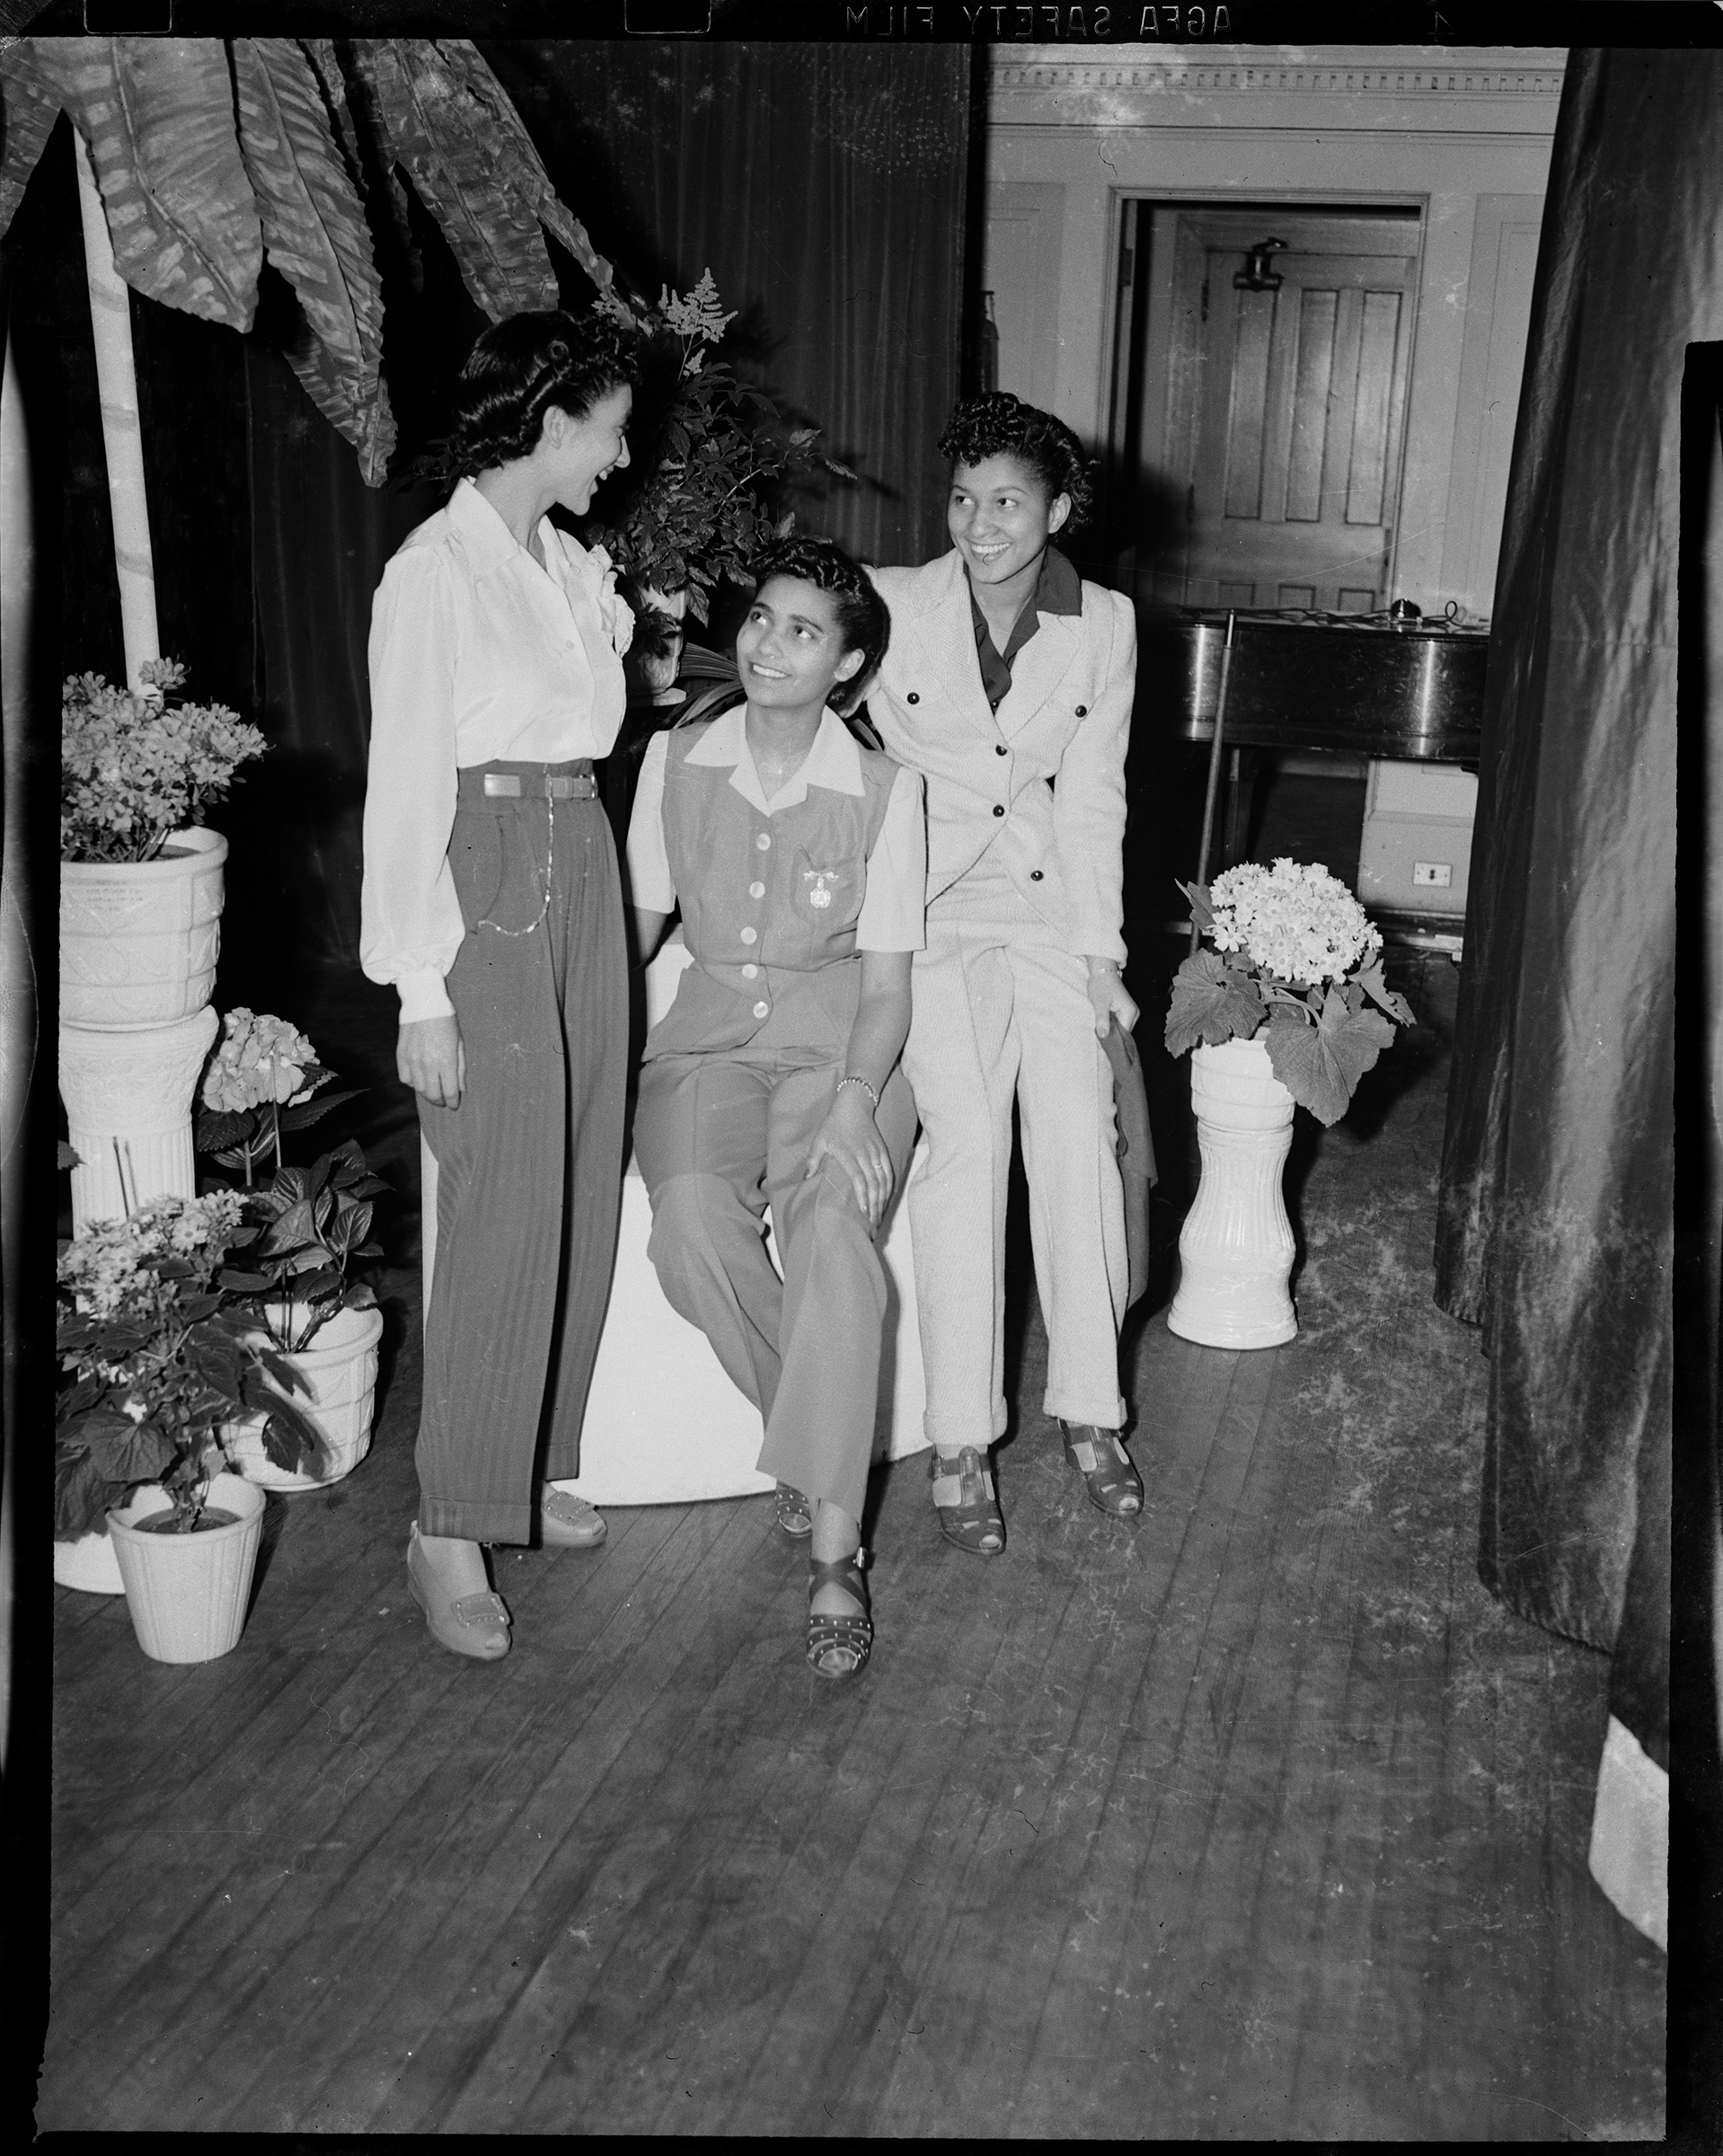     Charles “Teenie” Harris, Three women wearing pants, pictured at the Beauty Shop Owners&#8217; Fashion Review in Schenley High School, 1945. Silver Gelatin print. Courtesy of Carnegie Museum of Art, Pittsburgh.

